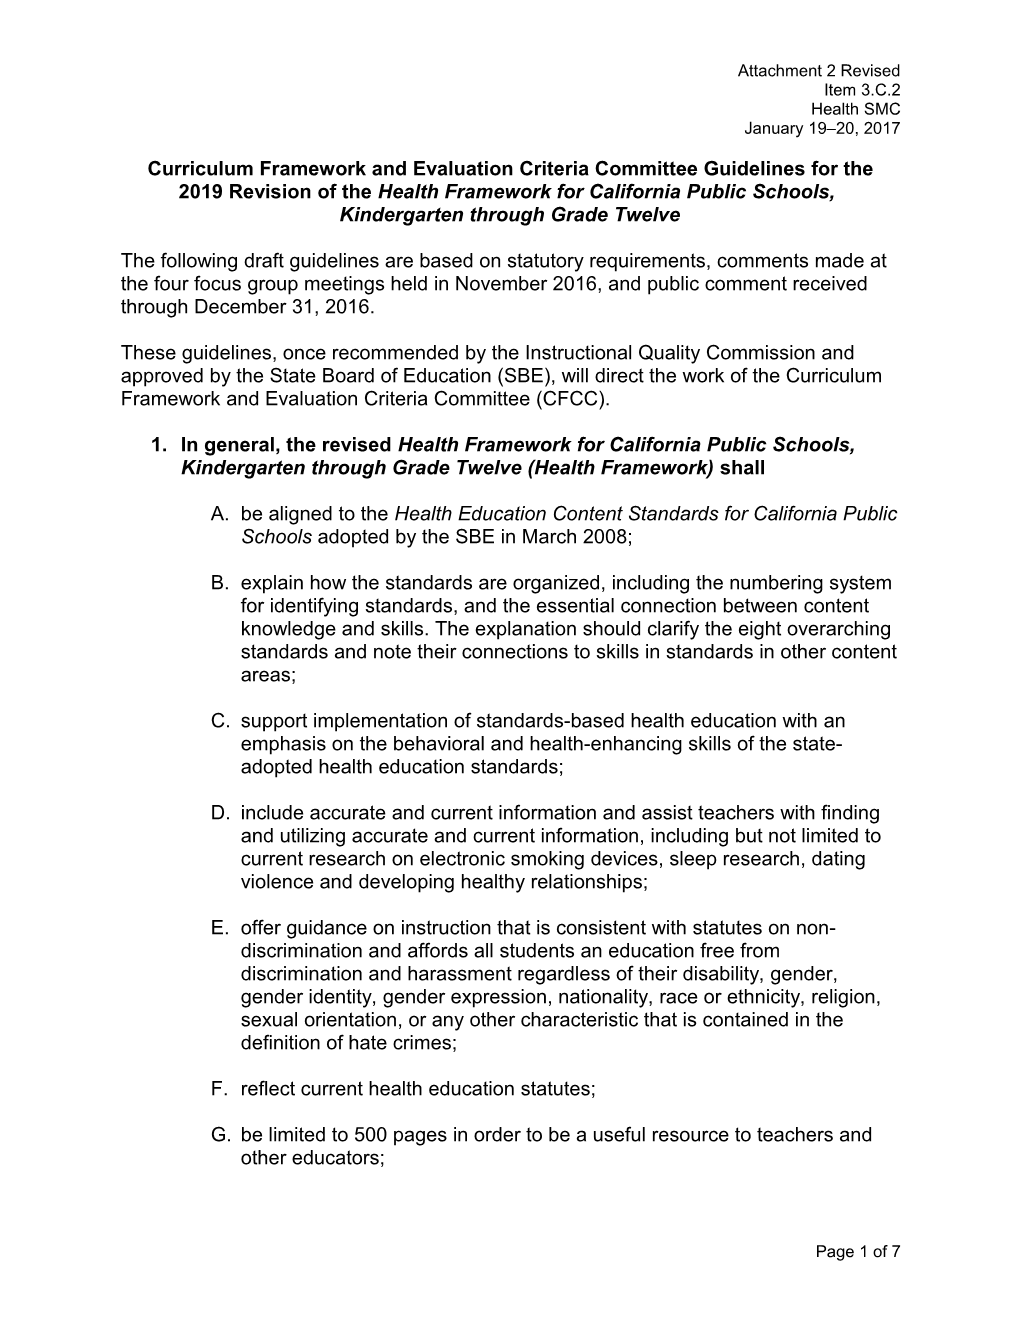 2019 Health Framework CFCC Guidelines - Instructional Quality Commission (CA Dept of Education)